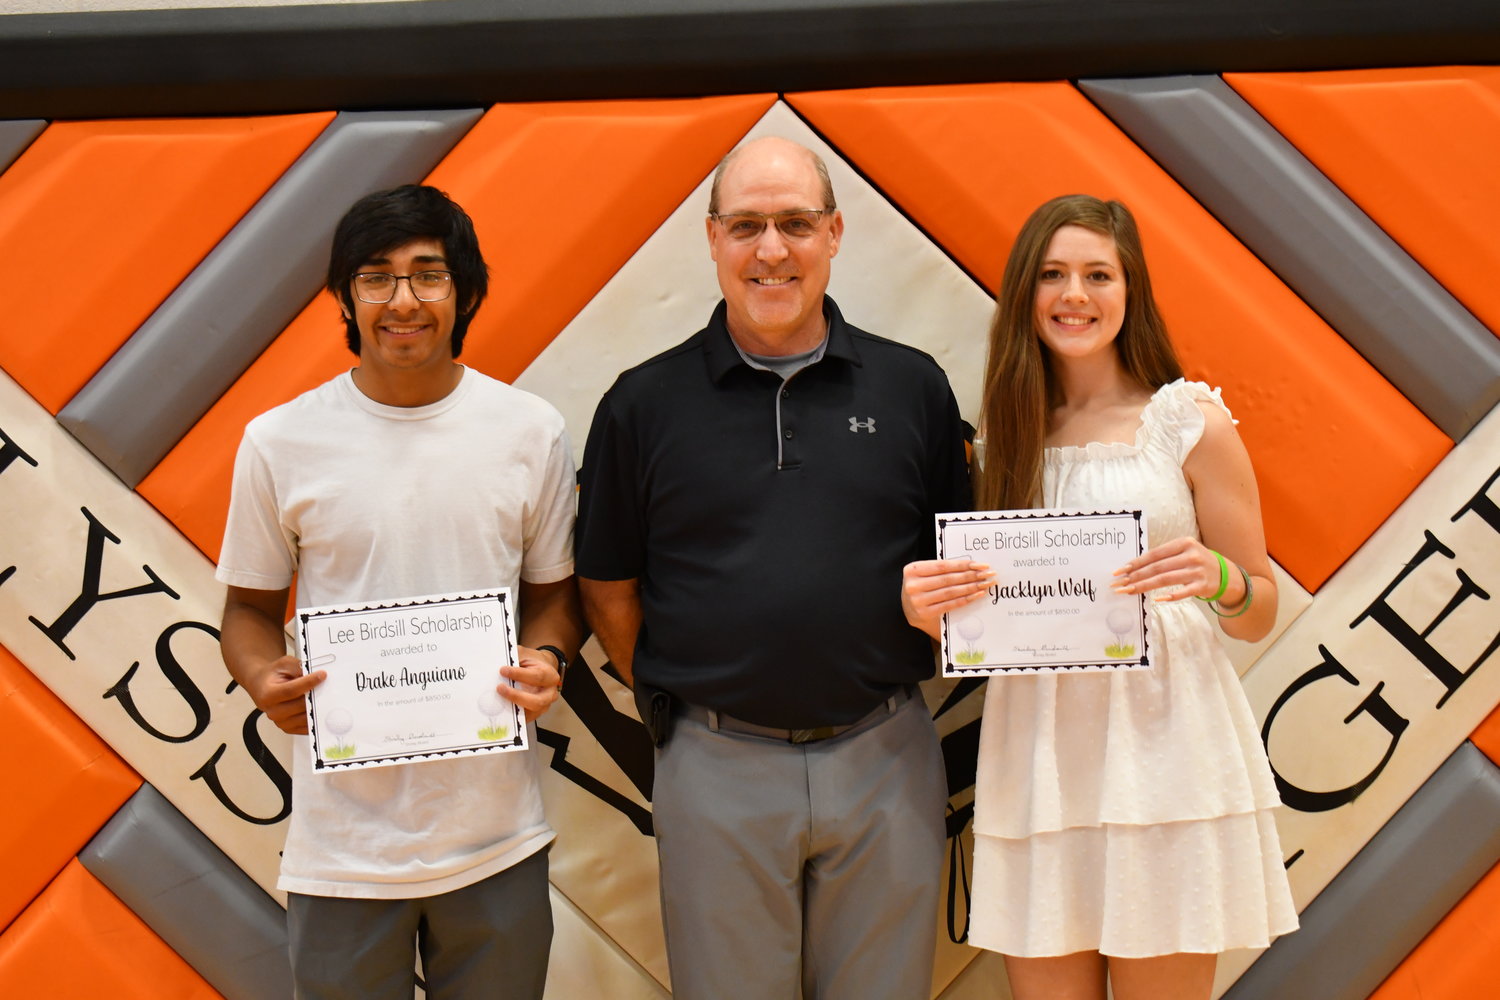 Senior Awards — Drake Anguiano and Jacklynn Wolf were given the Lee Birdsill Memorial Scholarship by Travis McAtee on Friday, May 13, 2022.